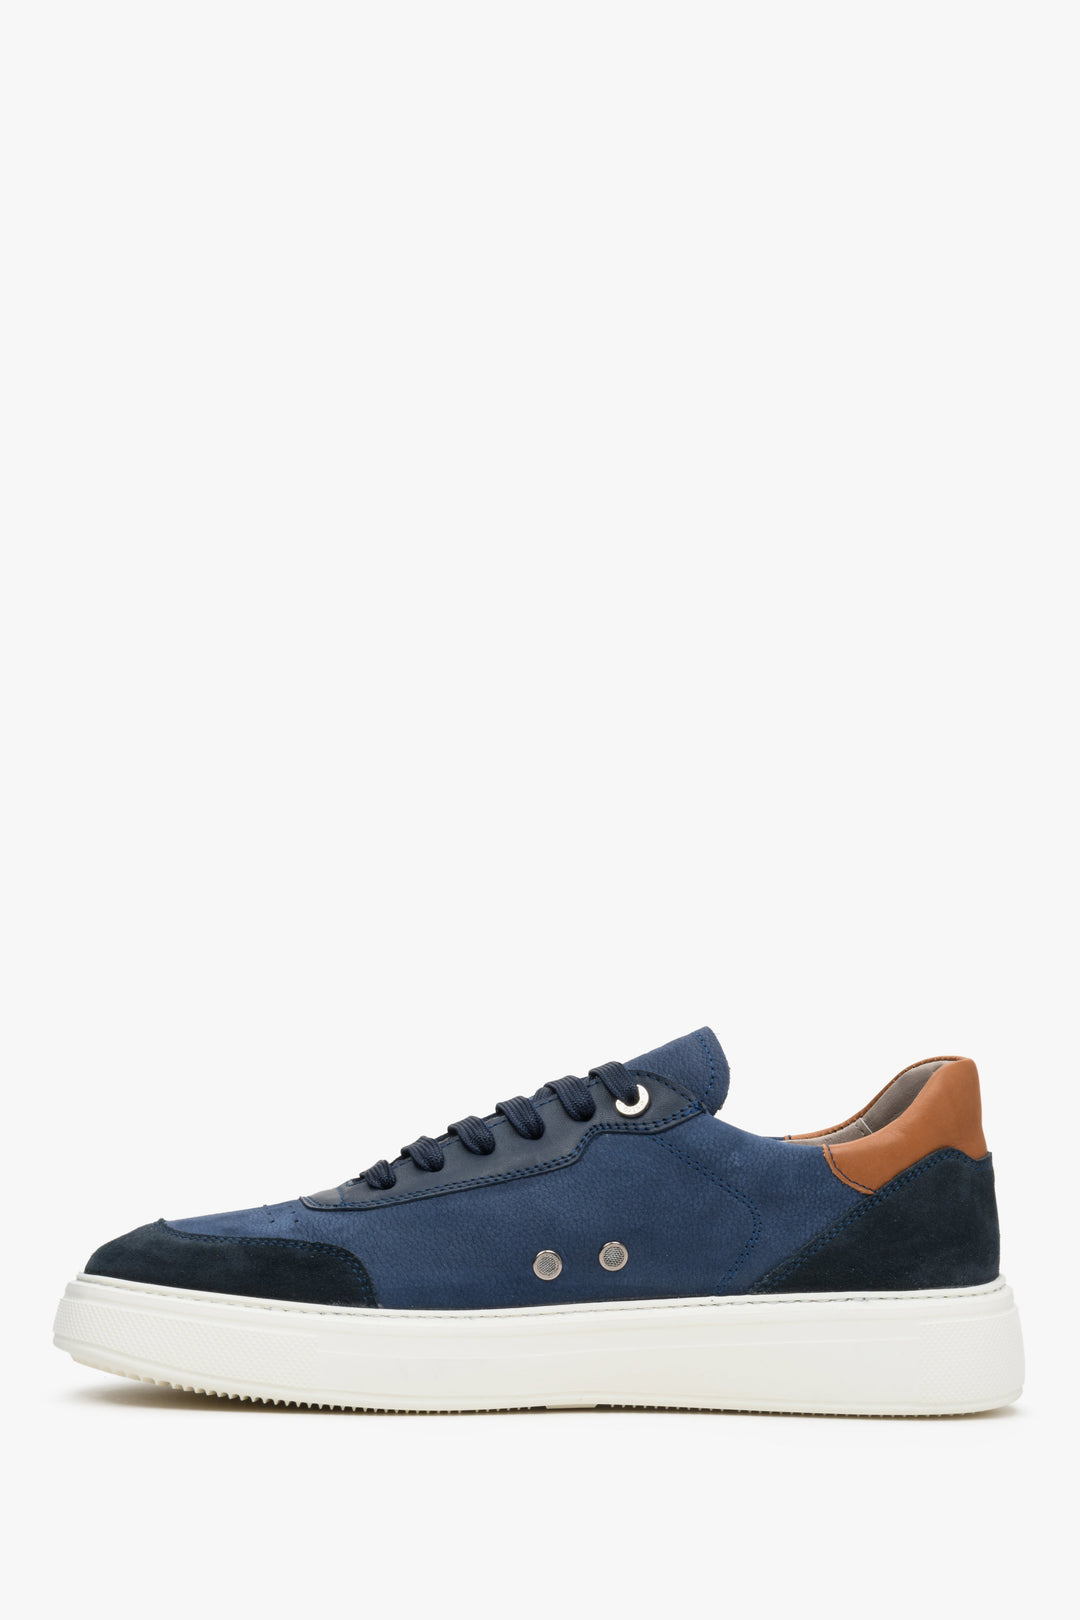 Spring sneakers for men made of nubuck and natural leather in blue-brown color.